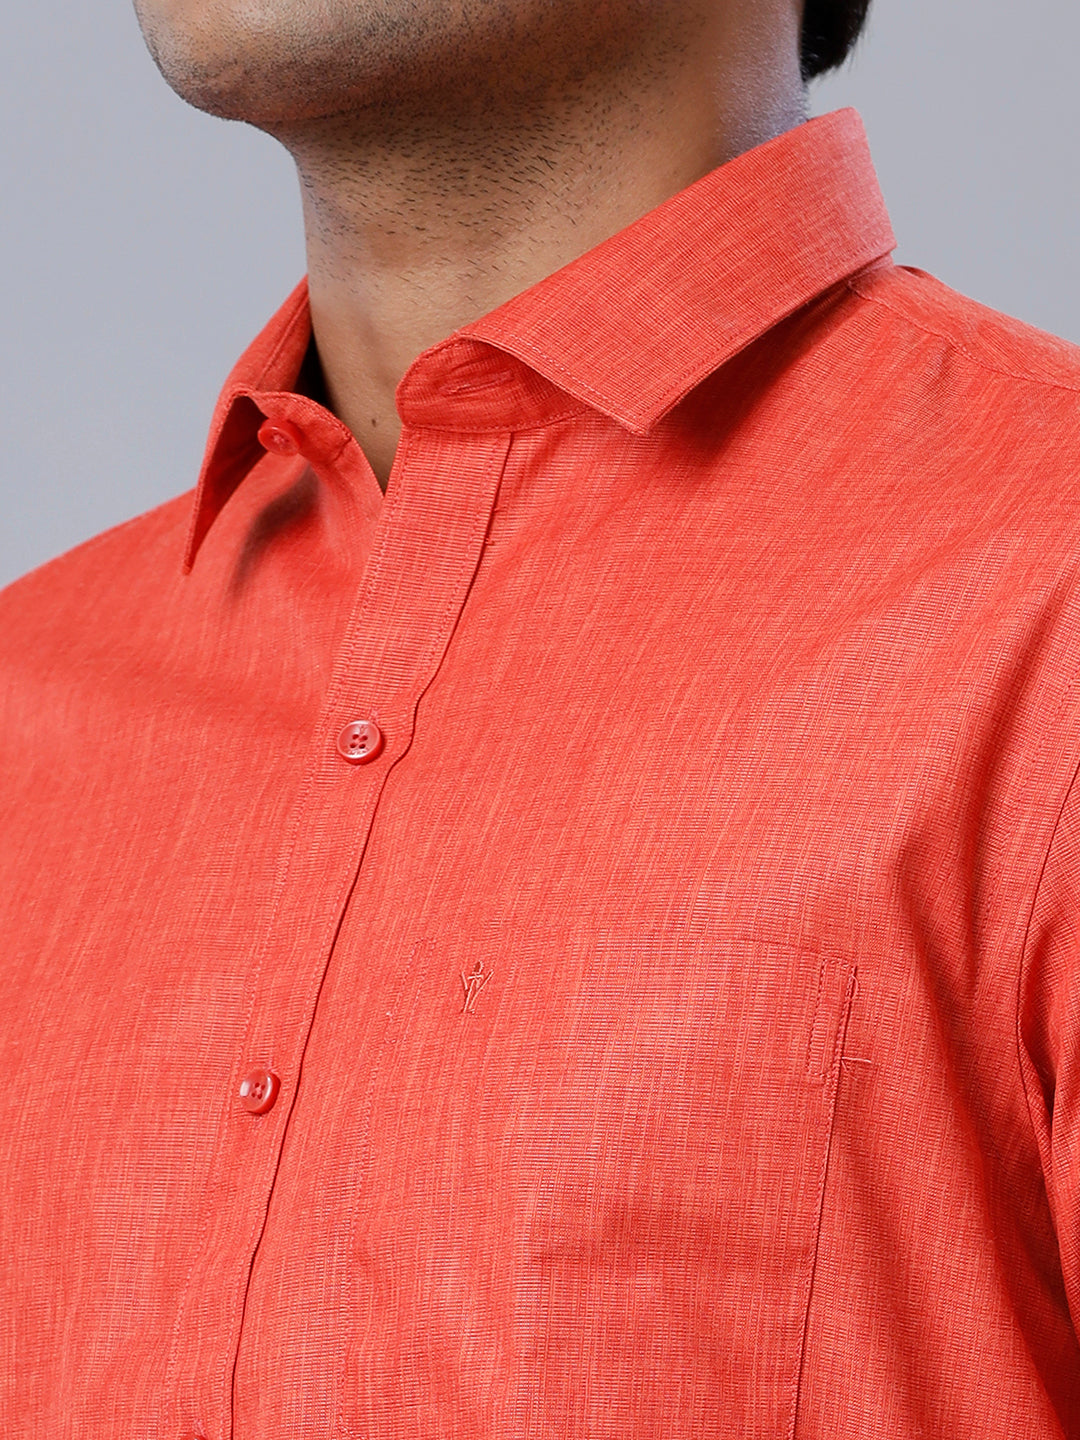 Mens Formal Shirt Half Sleeves Red T40 TP1-Zoom view